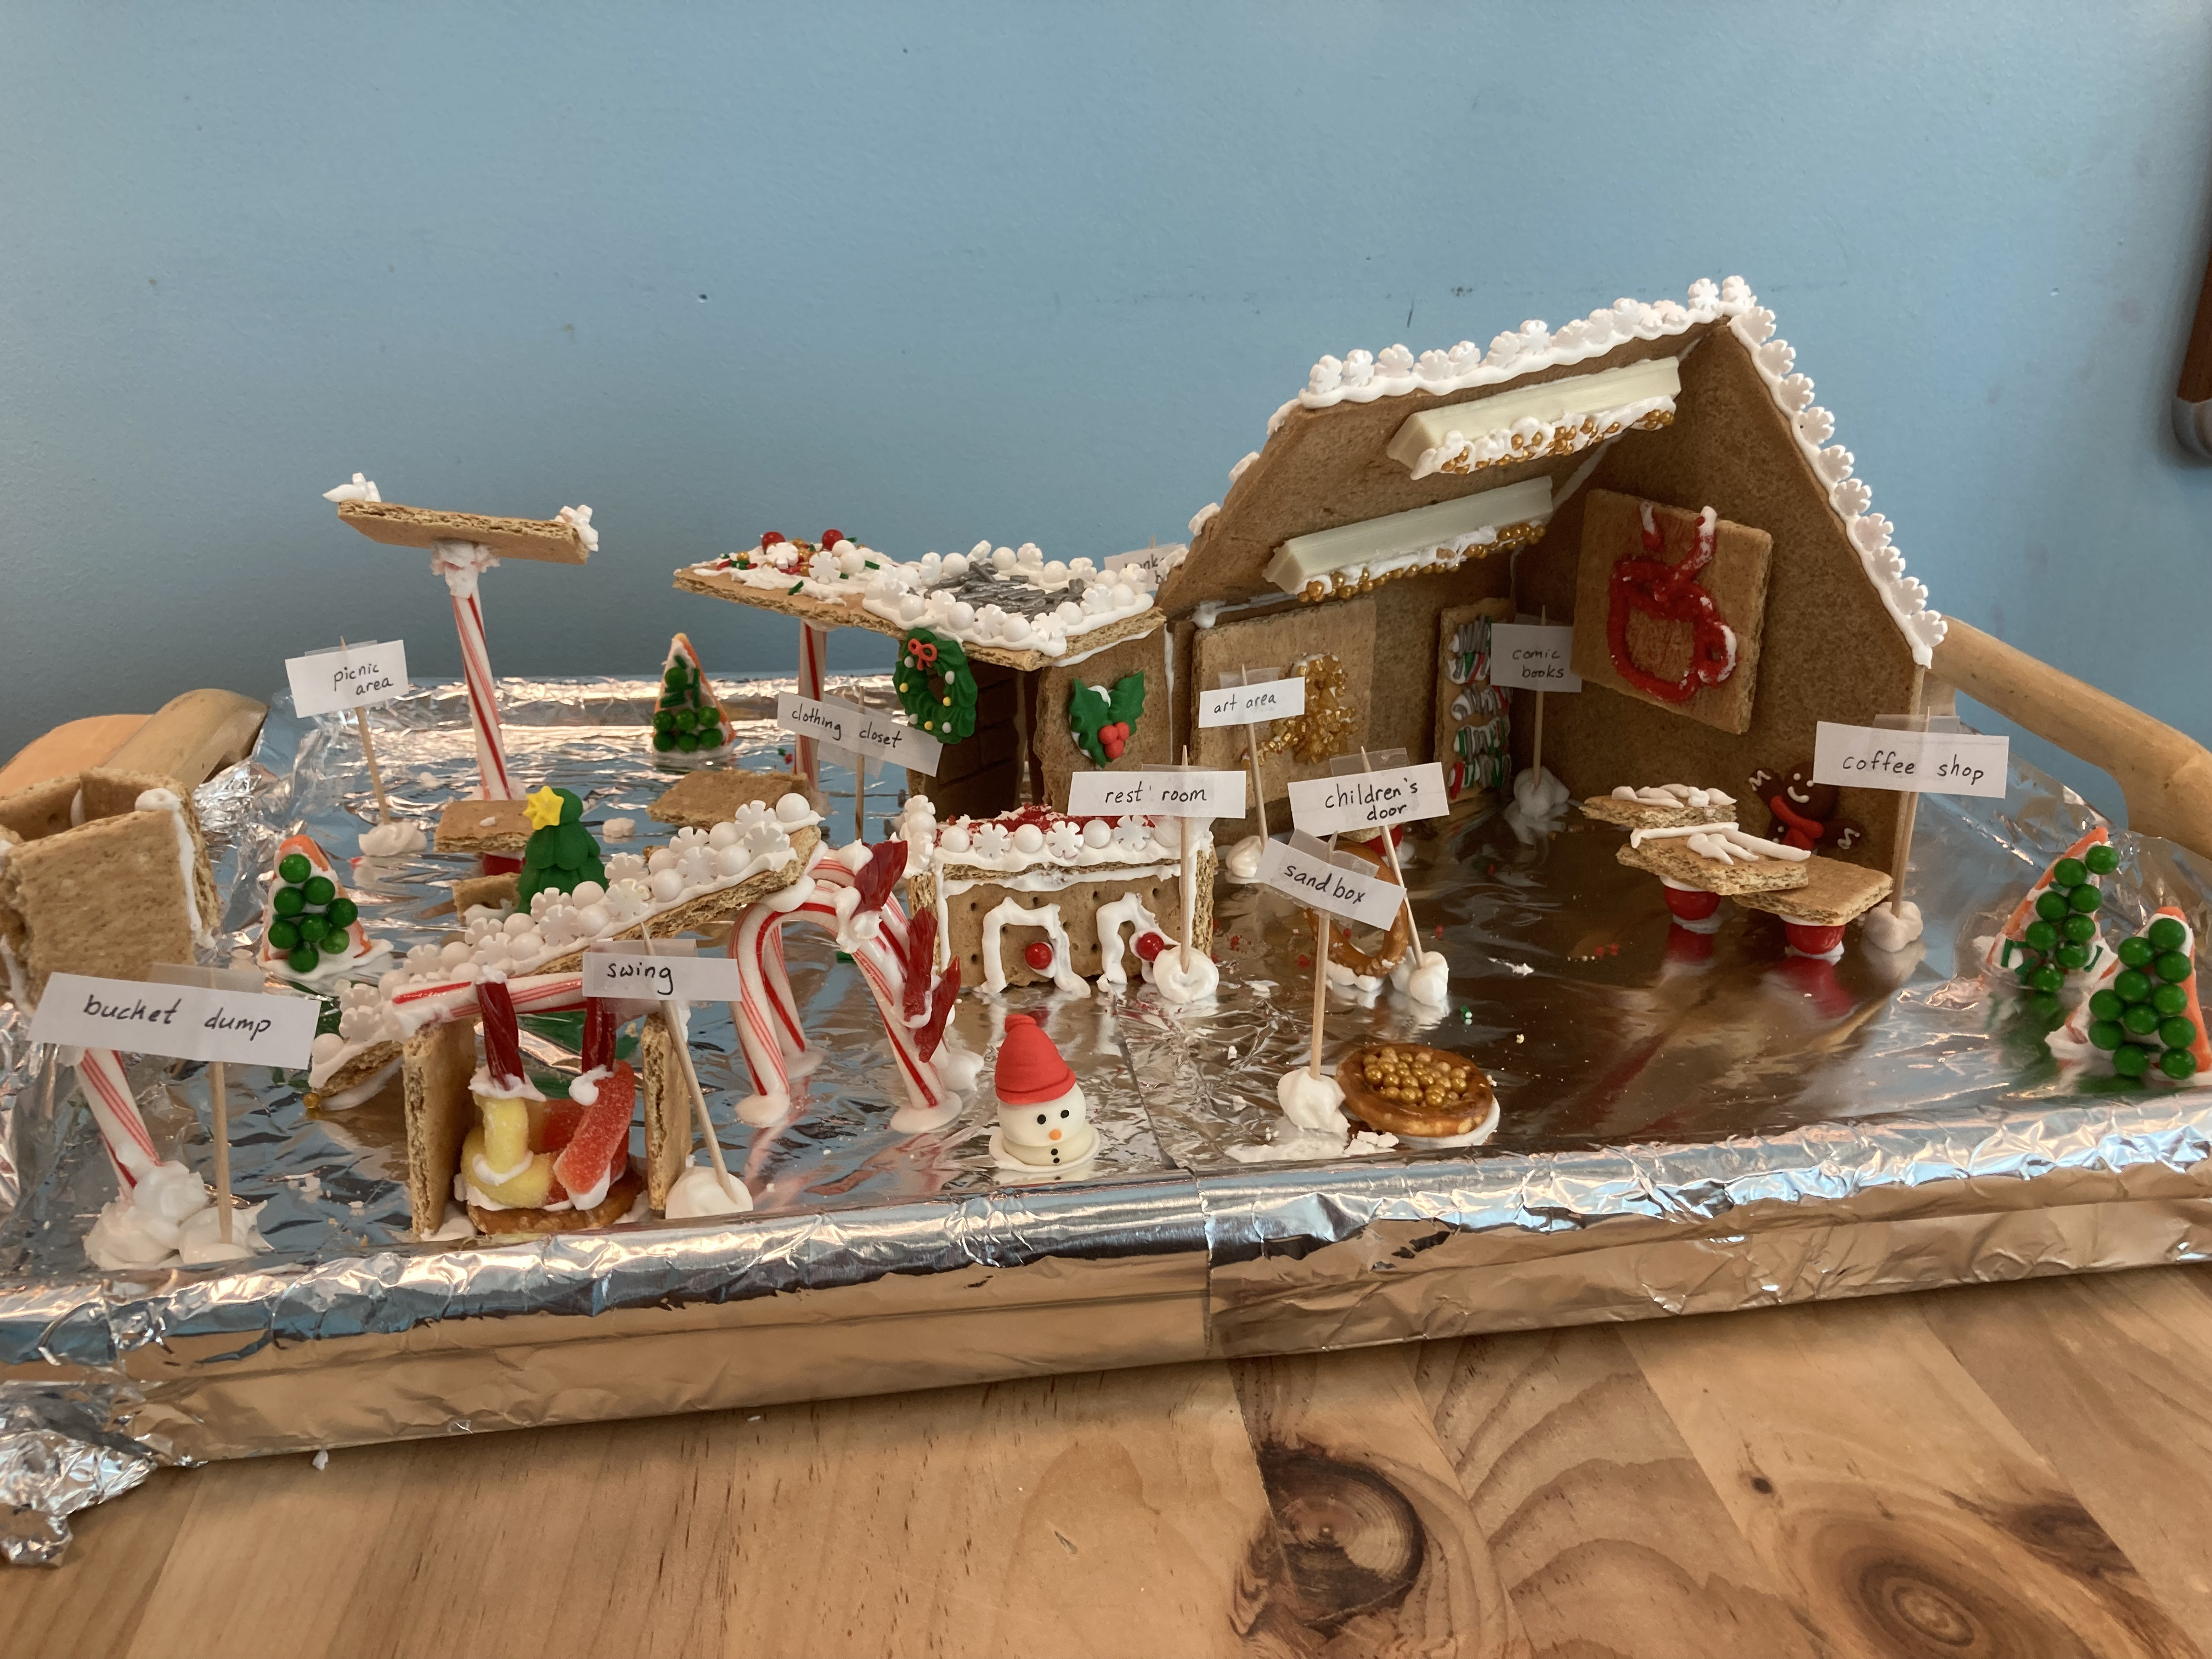 A gingerbread library has an elaborate park with many features in front.